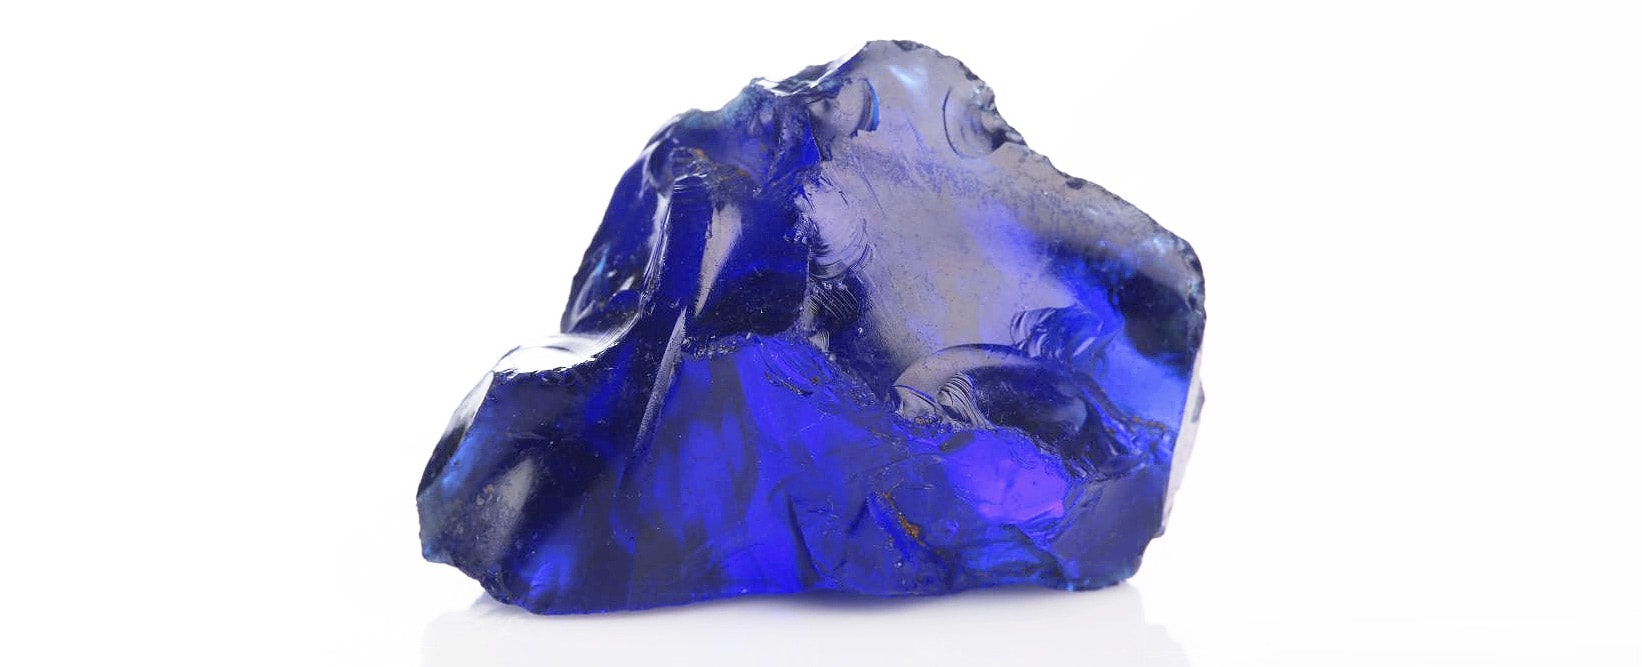 Blue Obsidian Meaning and Properties 1